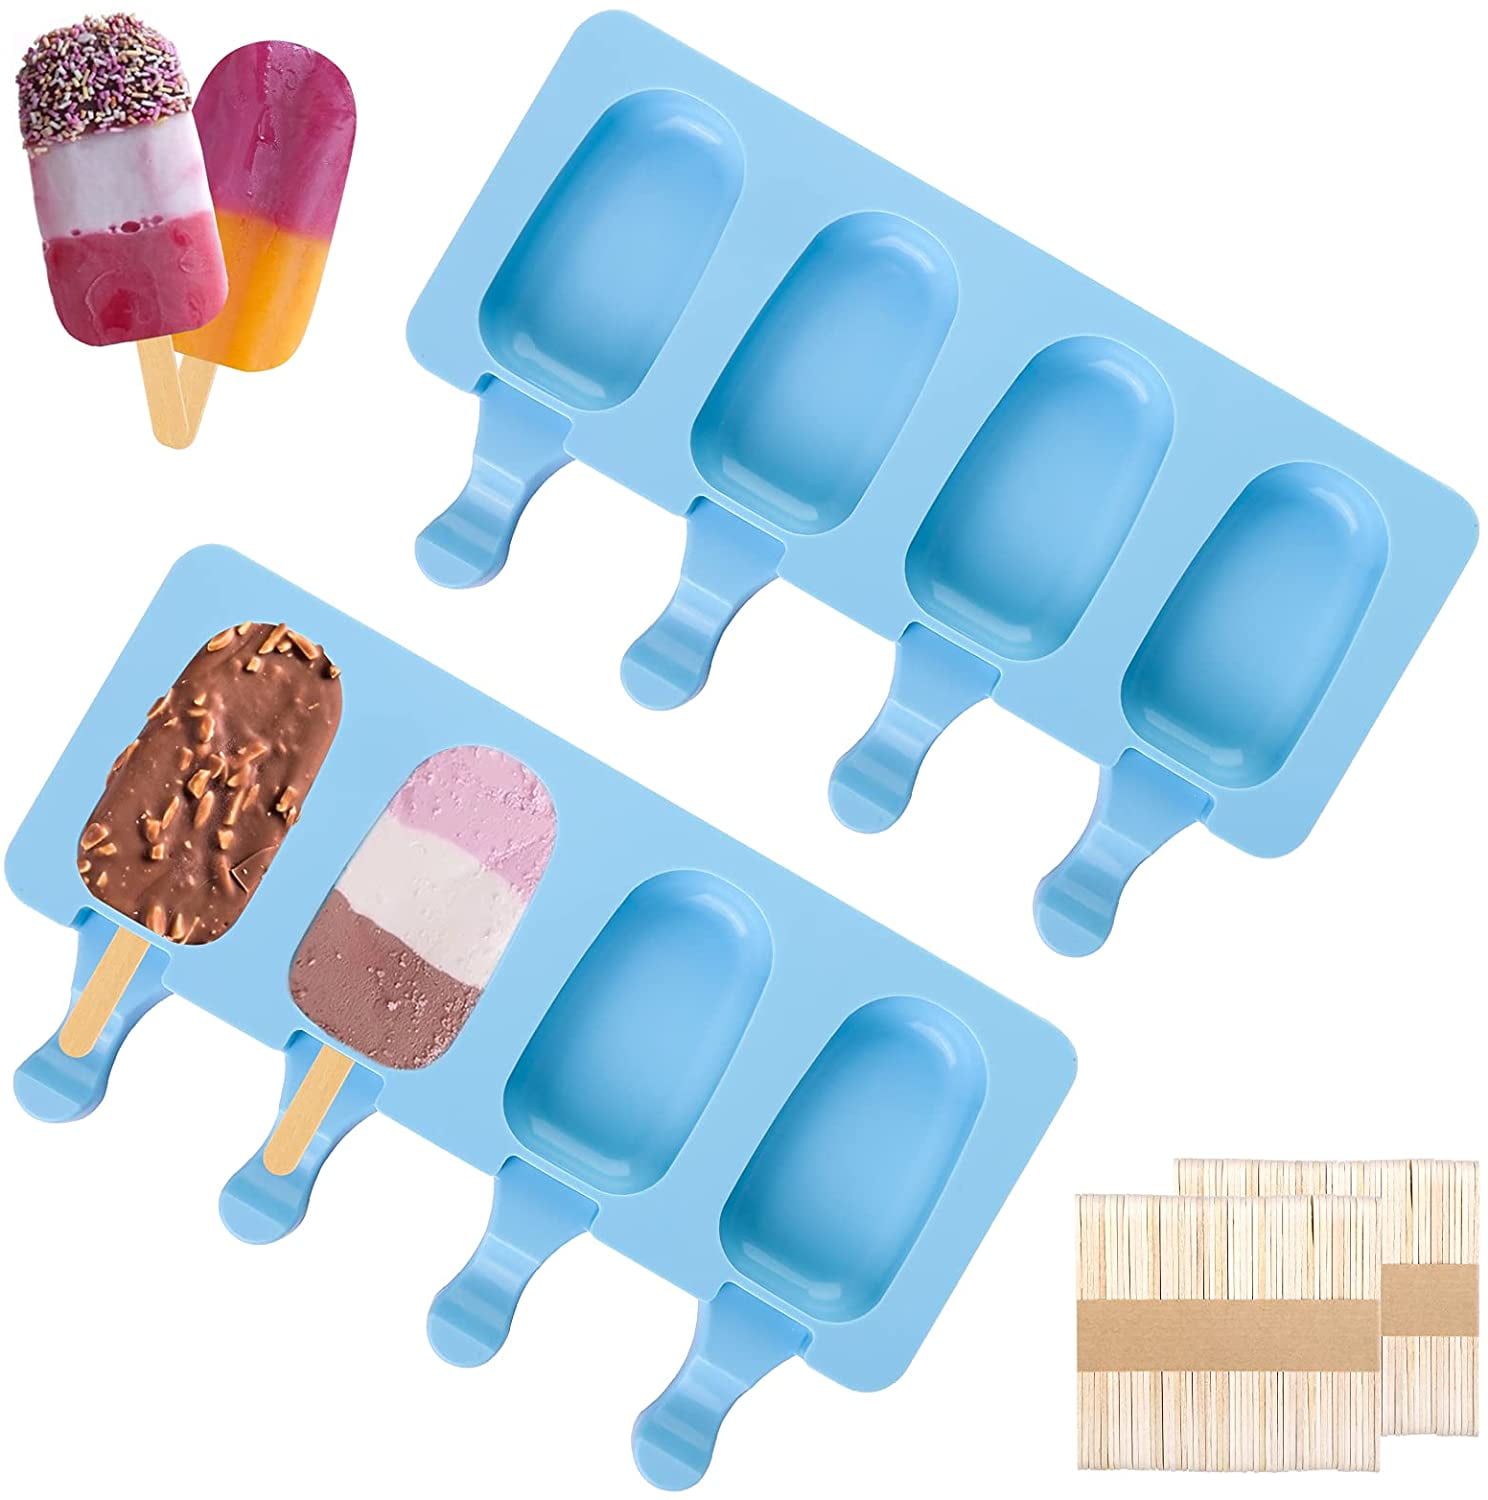 Forzero Popsicle Molds, 2-Cavities Homemade Silicone Ice Pop Mold with Lid, Cute Cartoon Shape Ice Cream Mould for Kids, Popsicles Maker(Set of 2), Multicolor